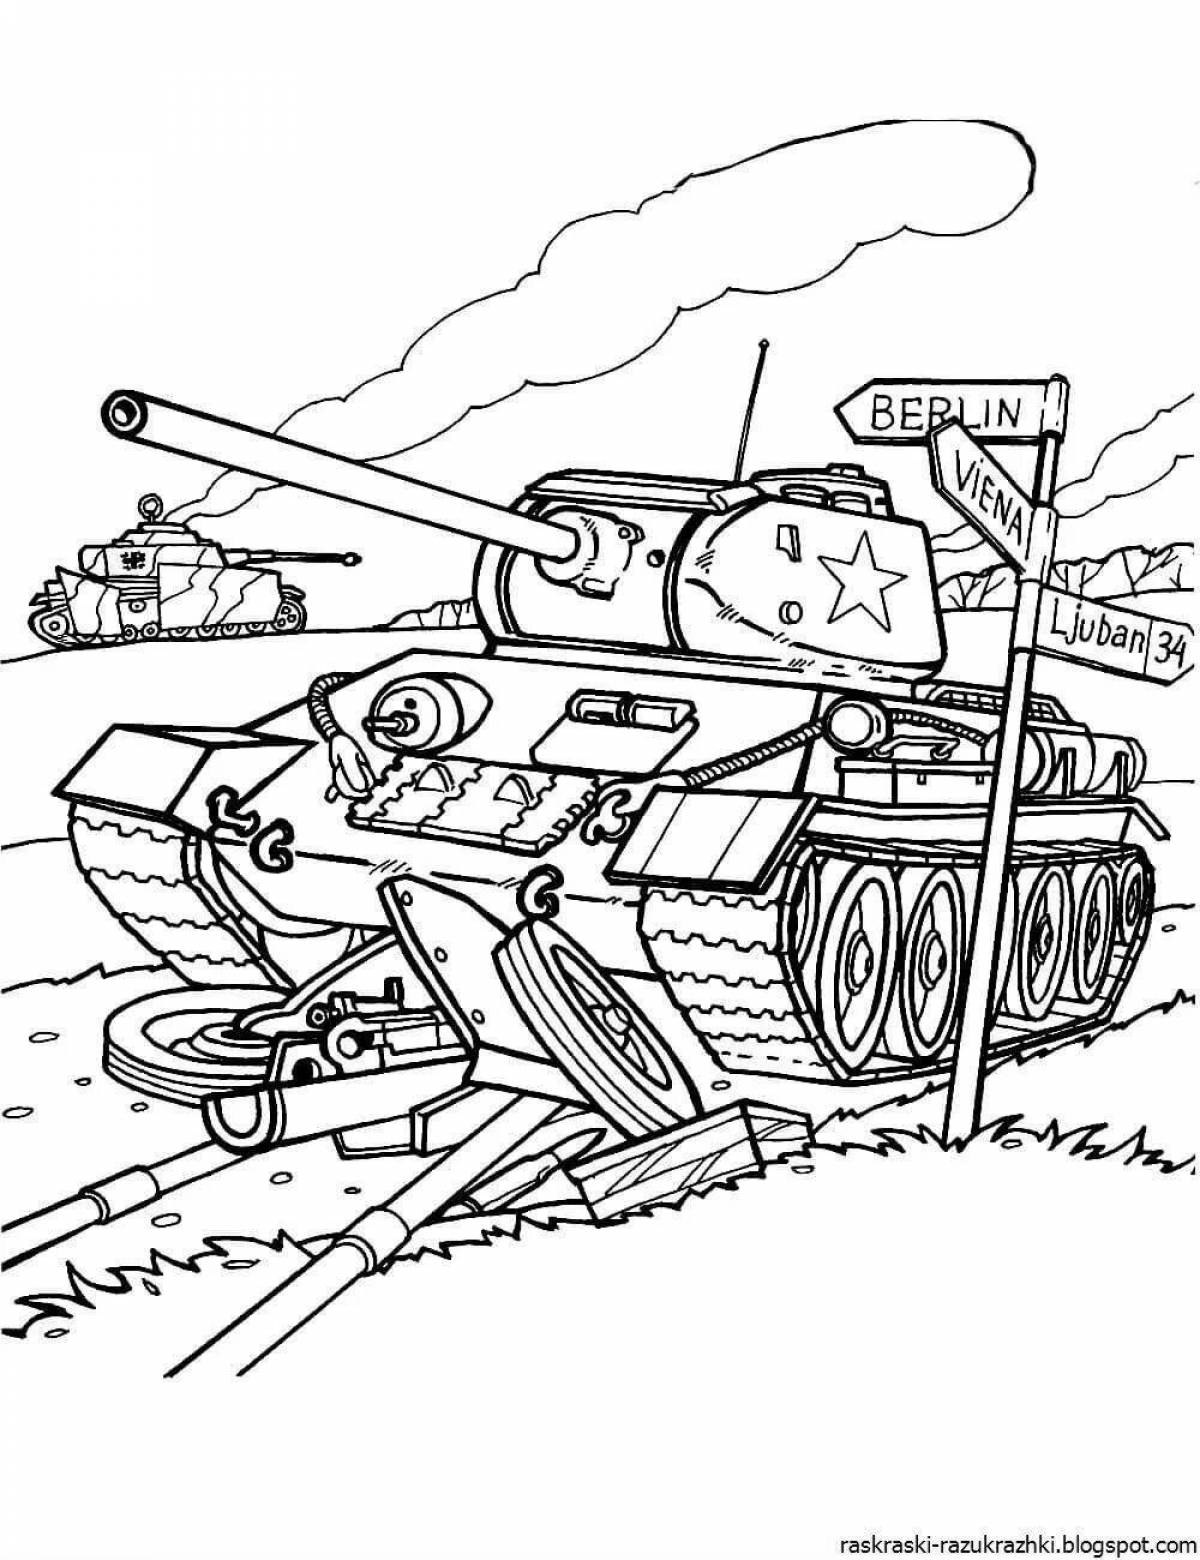 Relaxing military coloring book for 6-7 year olds